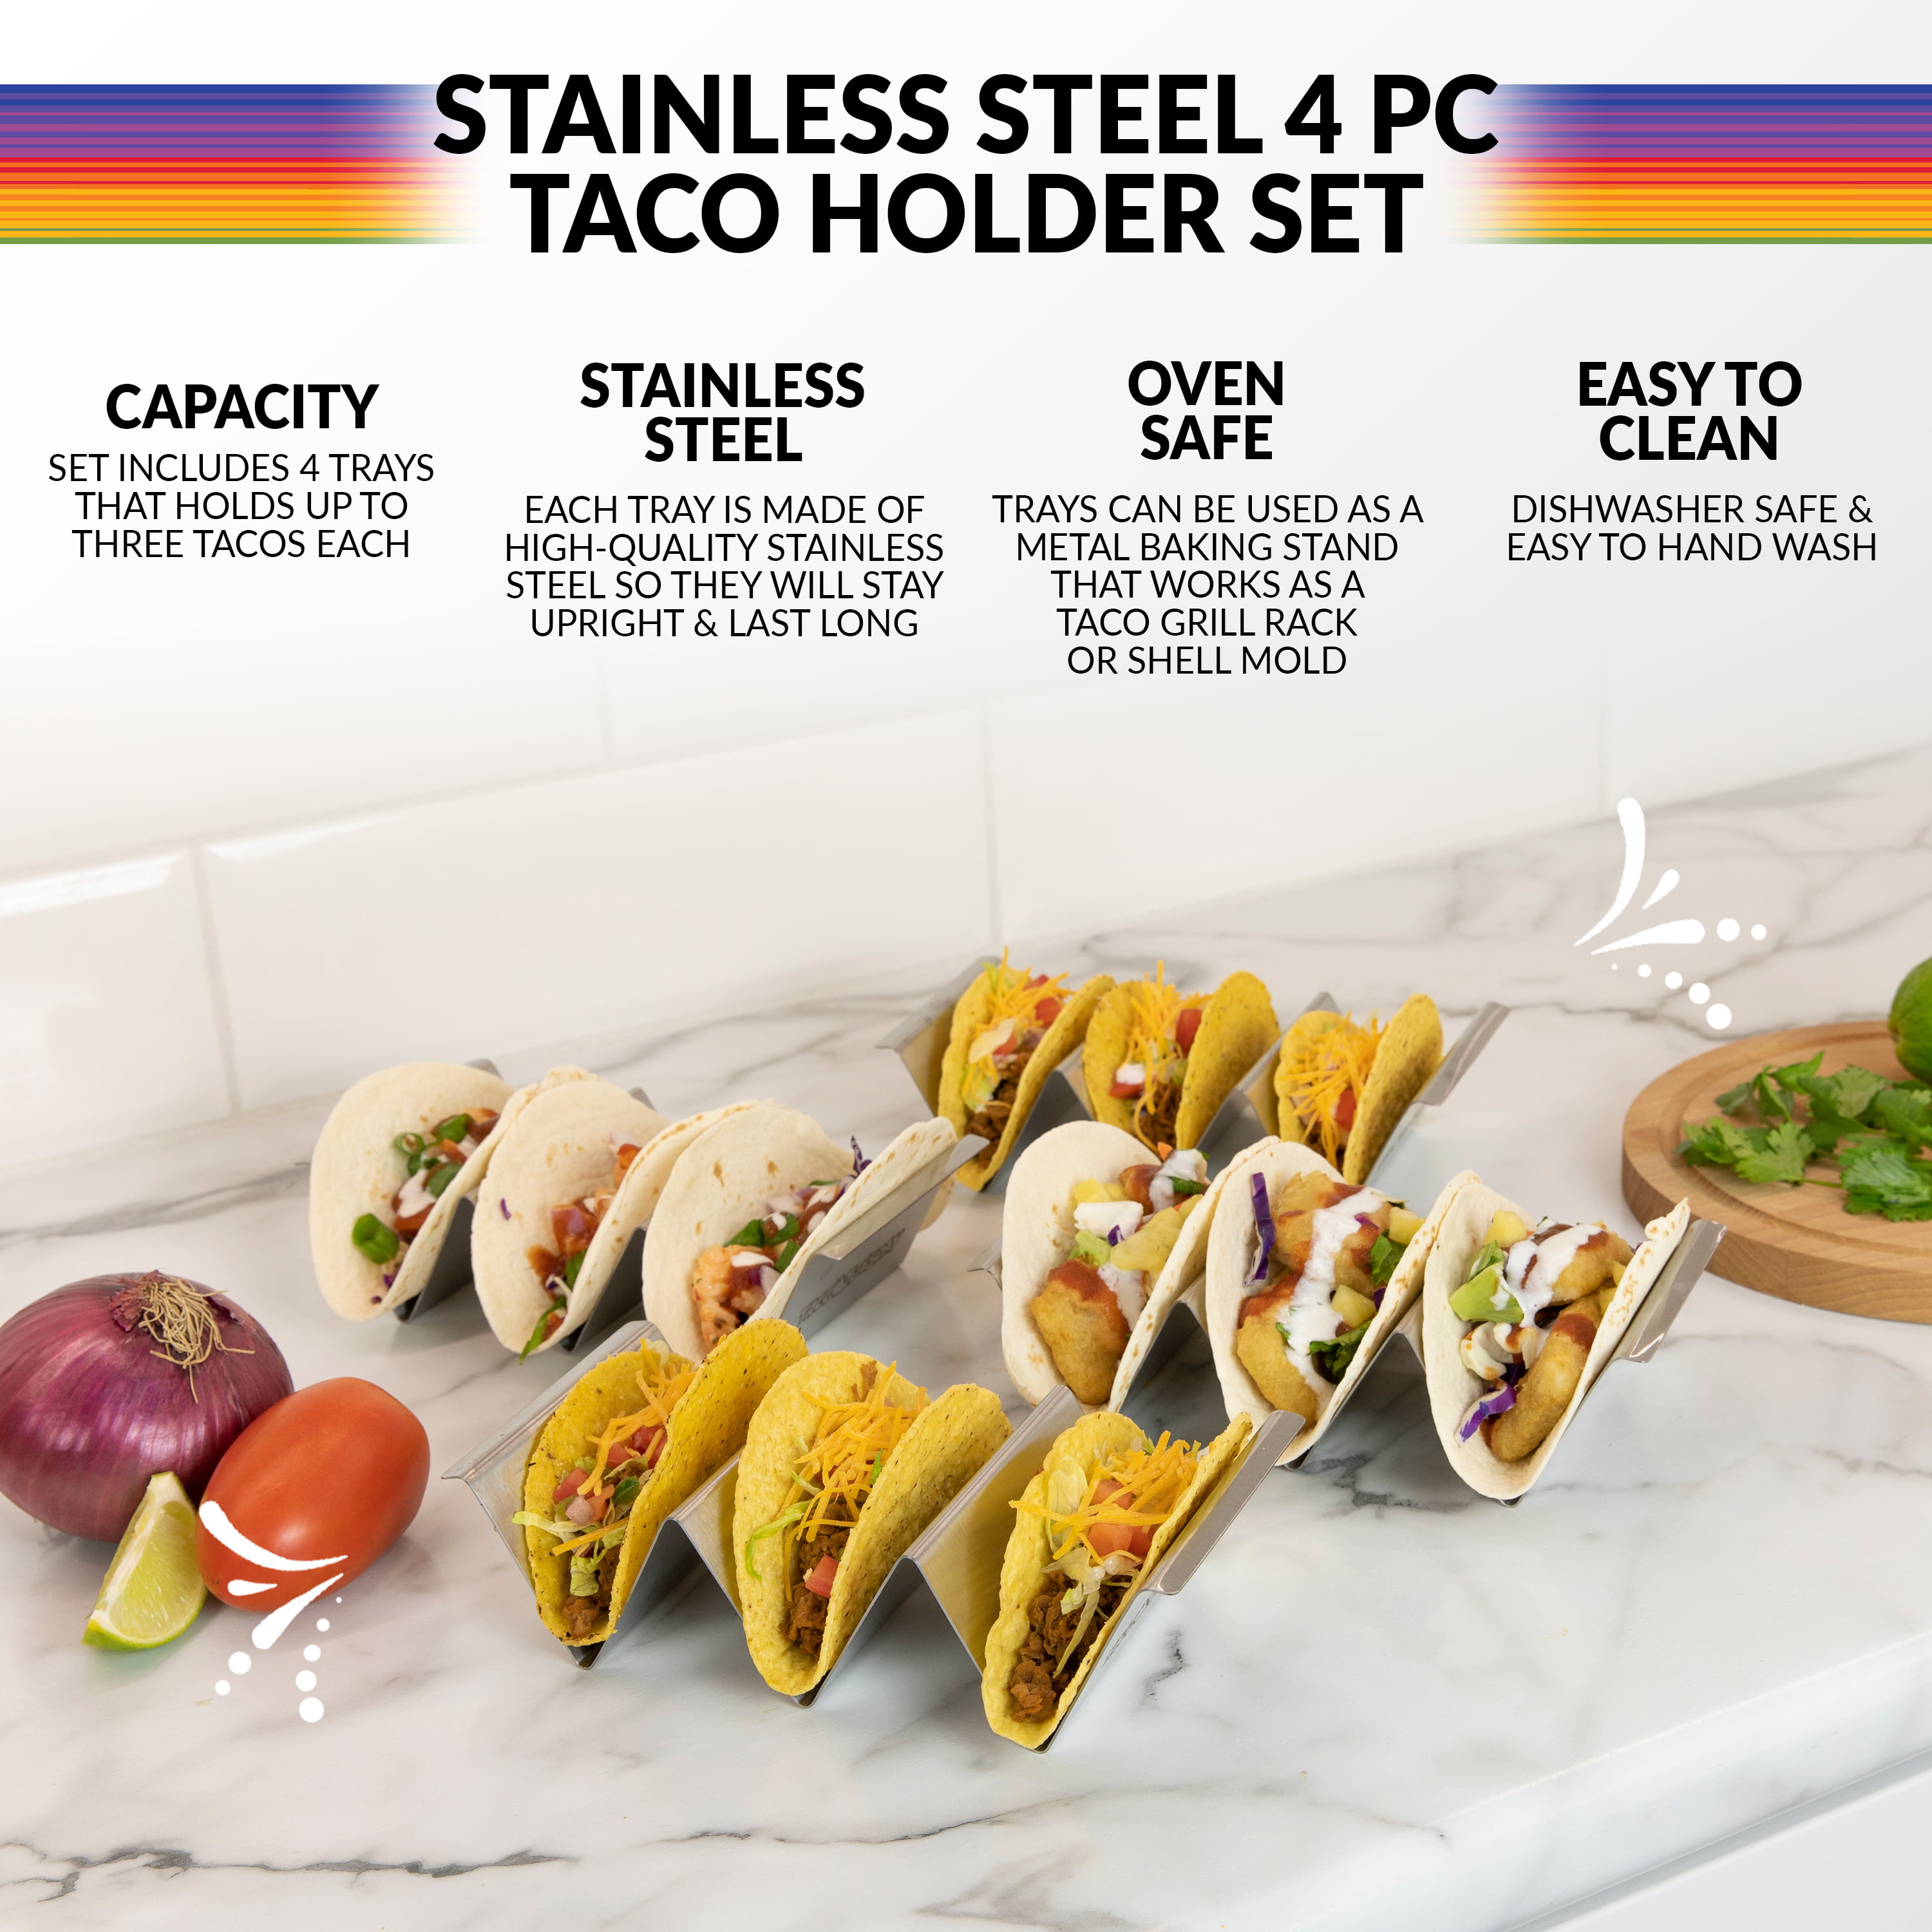 Taco Holder Stand and Grill Set of 4 Stainless Steel Serving Trays with 2 Sauce Cups for Restaurant Home Kitchen,Safe for Dishwasher Oven 